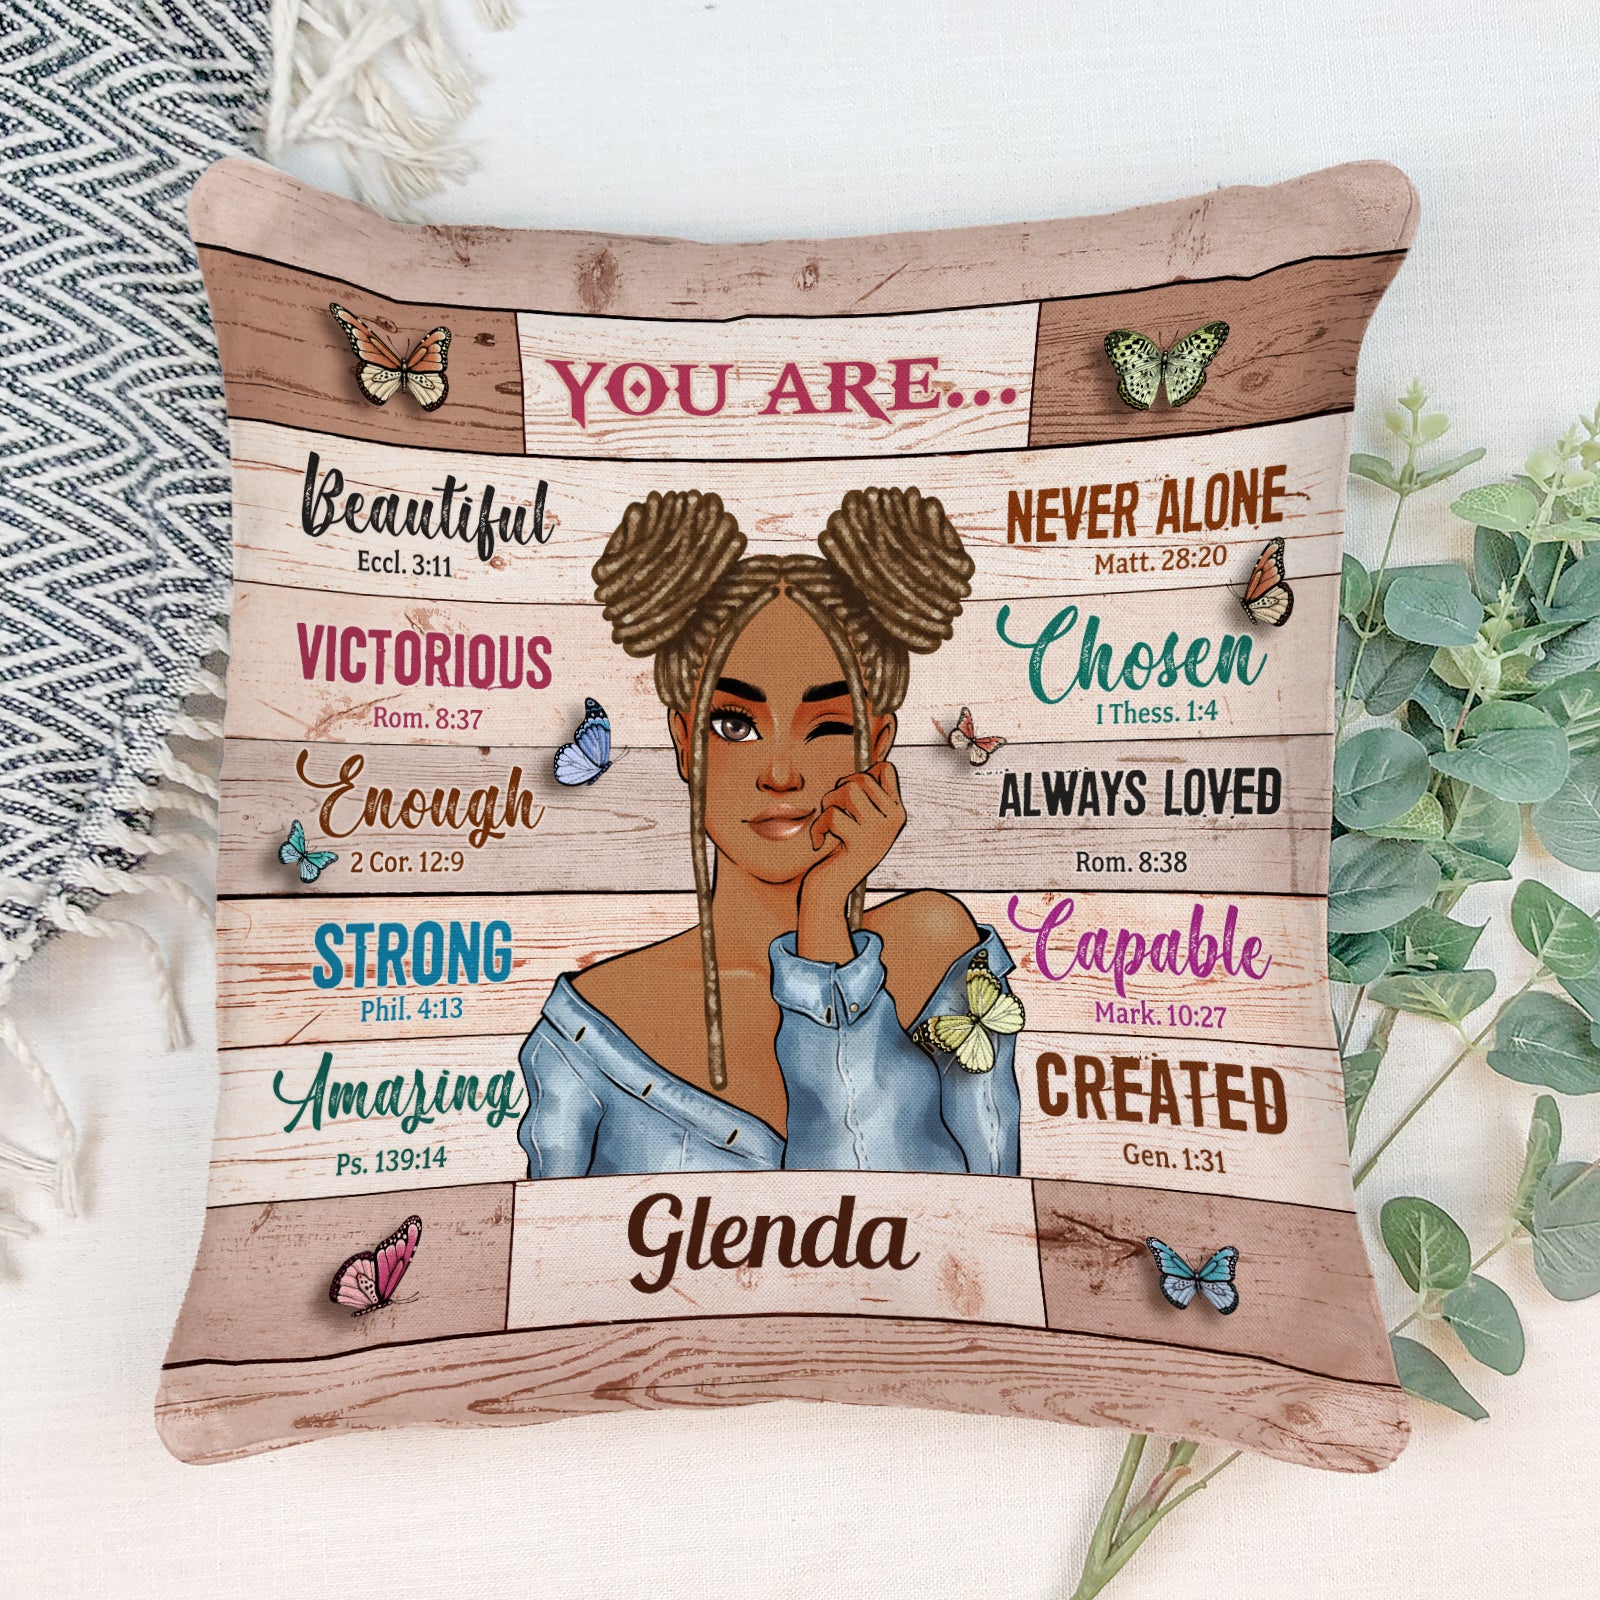 You Are Beautiful Never Alone - Personalized Pillow - Birthday Gift For Girls, Black Girls